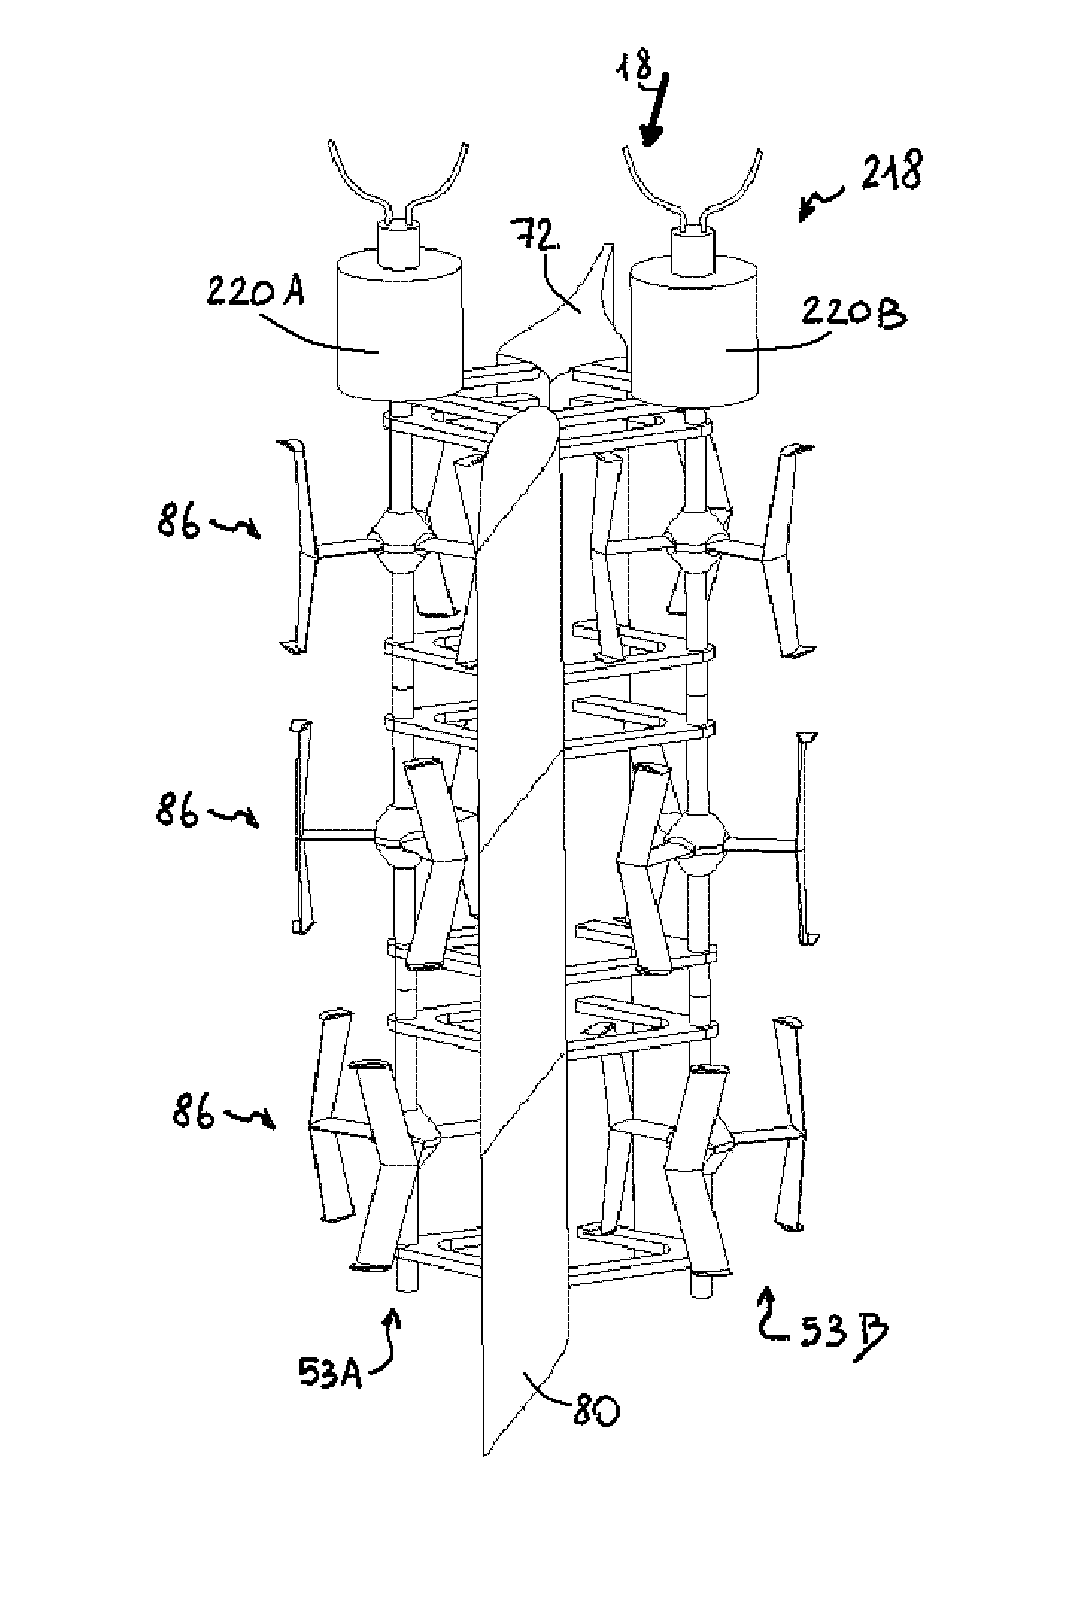 Turbine engine with transverse-flow hydraulic turbine having reduced total lift force